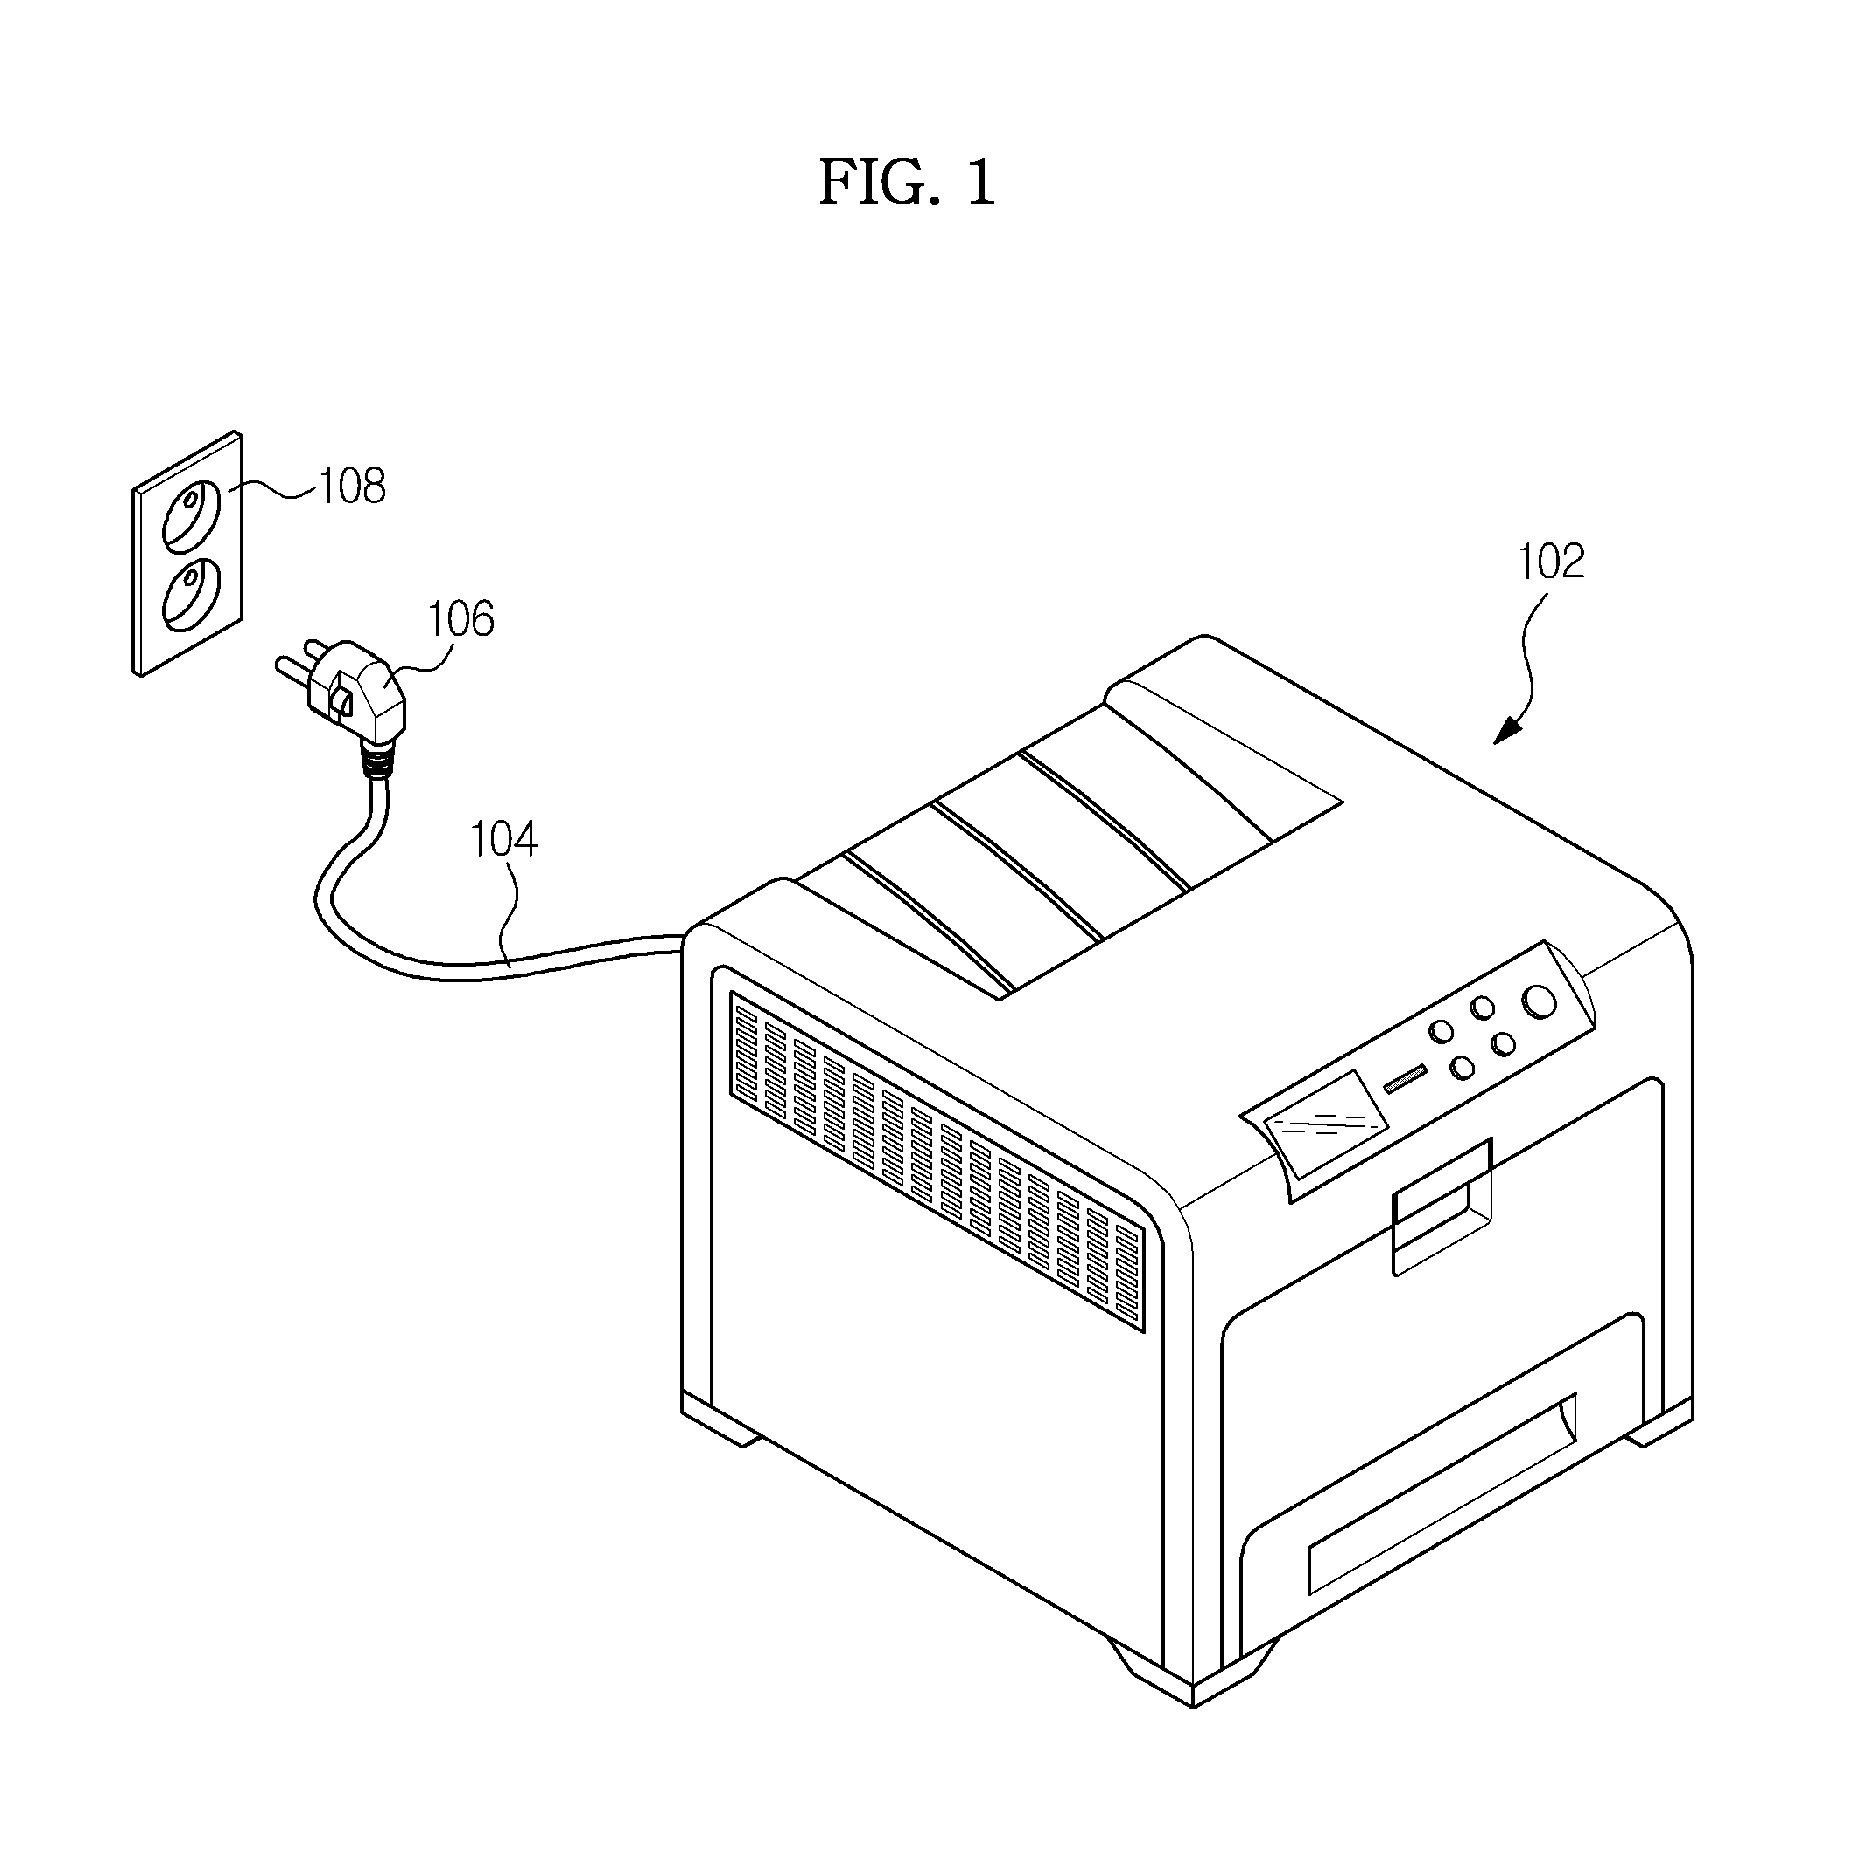 Discharging circuit, image forming apparatus having the discharging circuit, and power supply unit